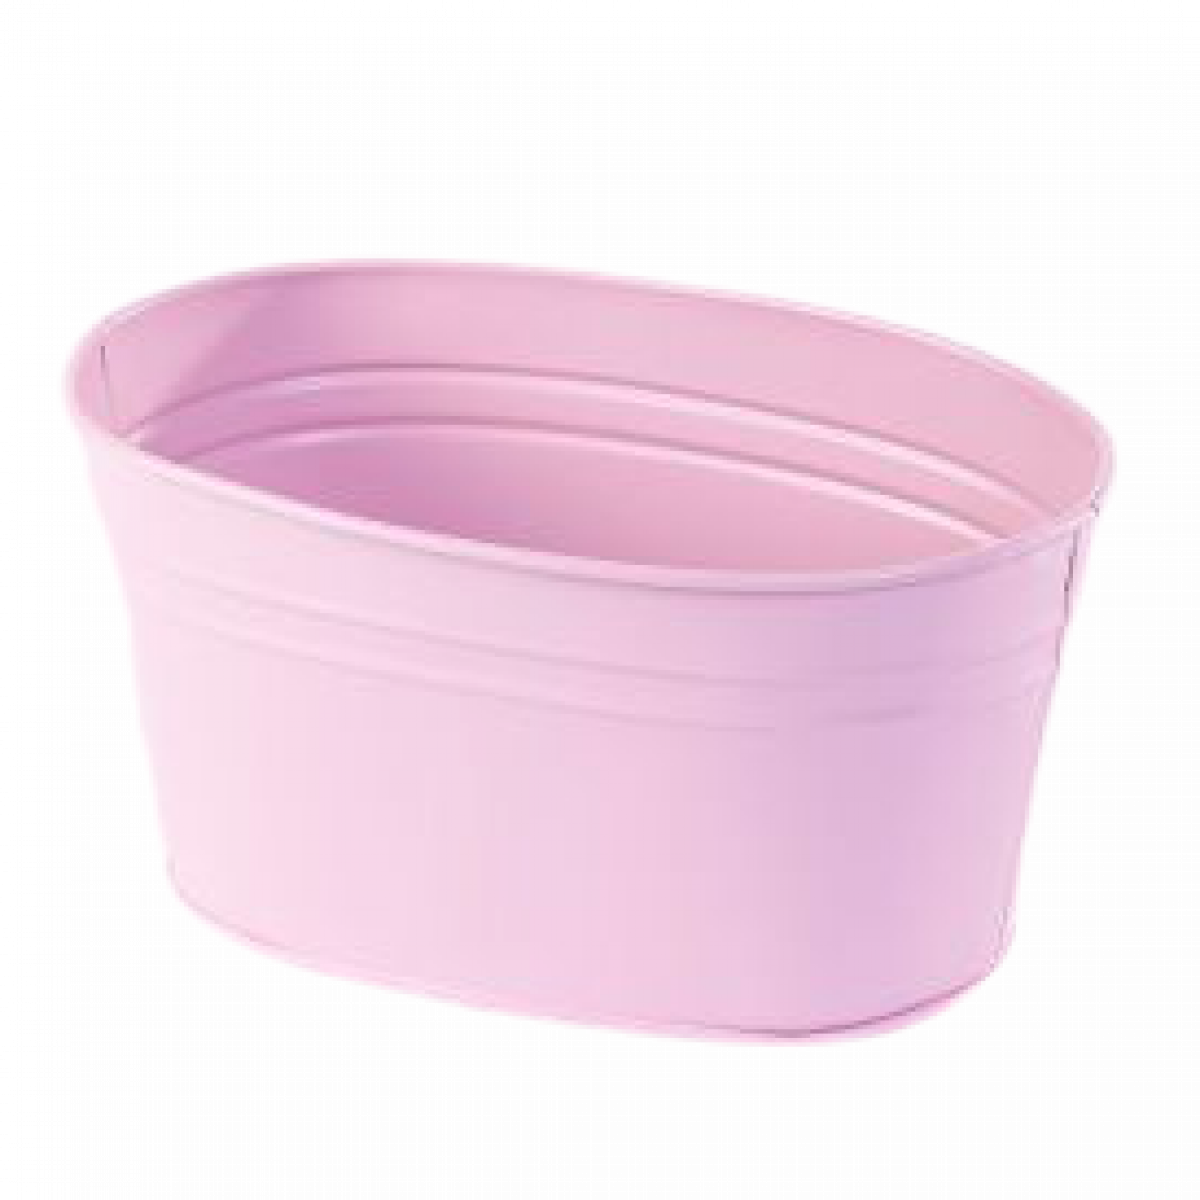 5208 Matisse Oval Pink (36 Pcs) Trough Lined Pink 18x11.5x8.5cm Tin/Metal Container 